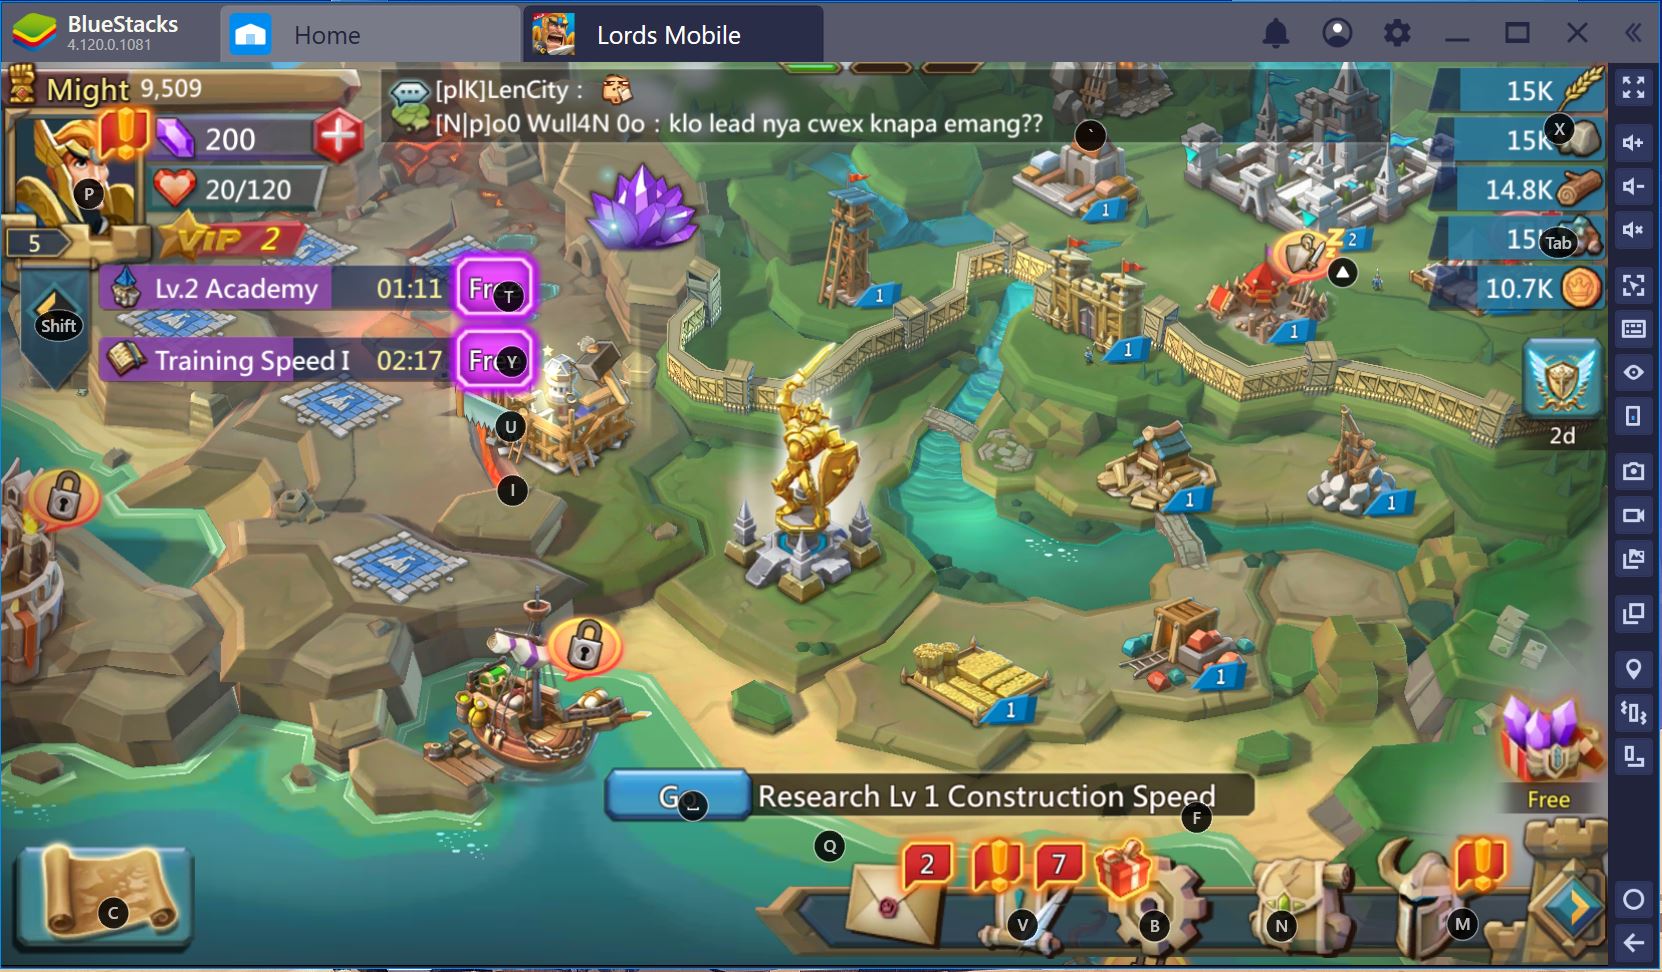 Lords Mobile Guide: Using BlueStacks to Streamline Your Gaming Experience